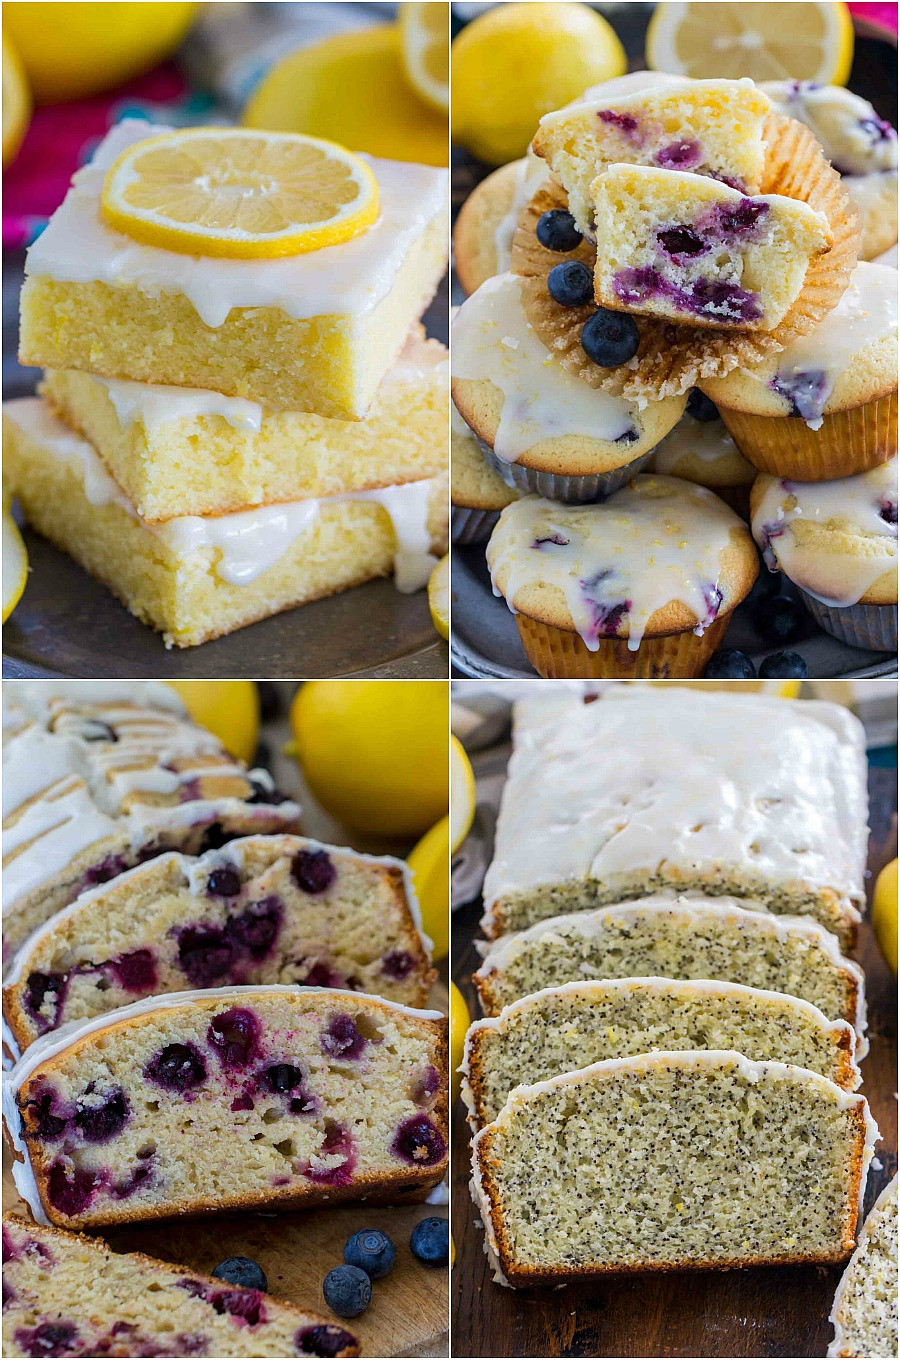 Easy And Quick Desserts
 Quick and Easy Lemon Desserts Sweet and Savory Meals